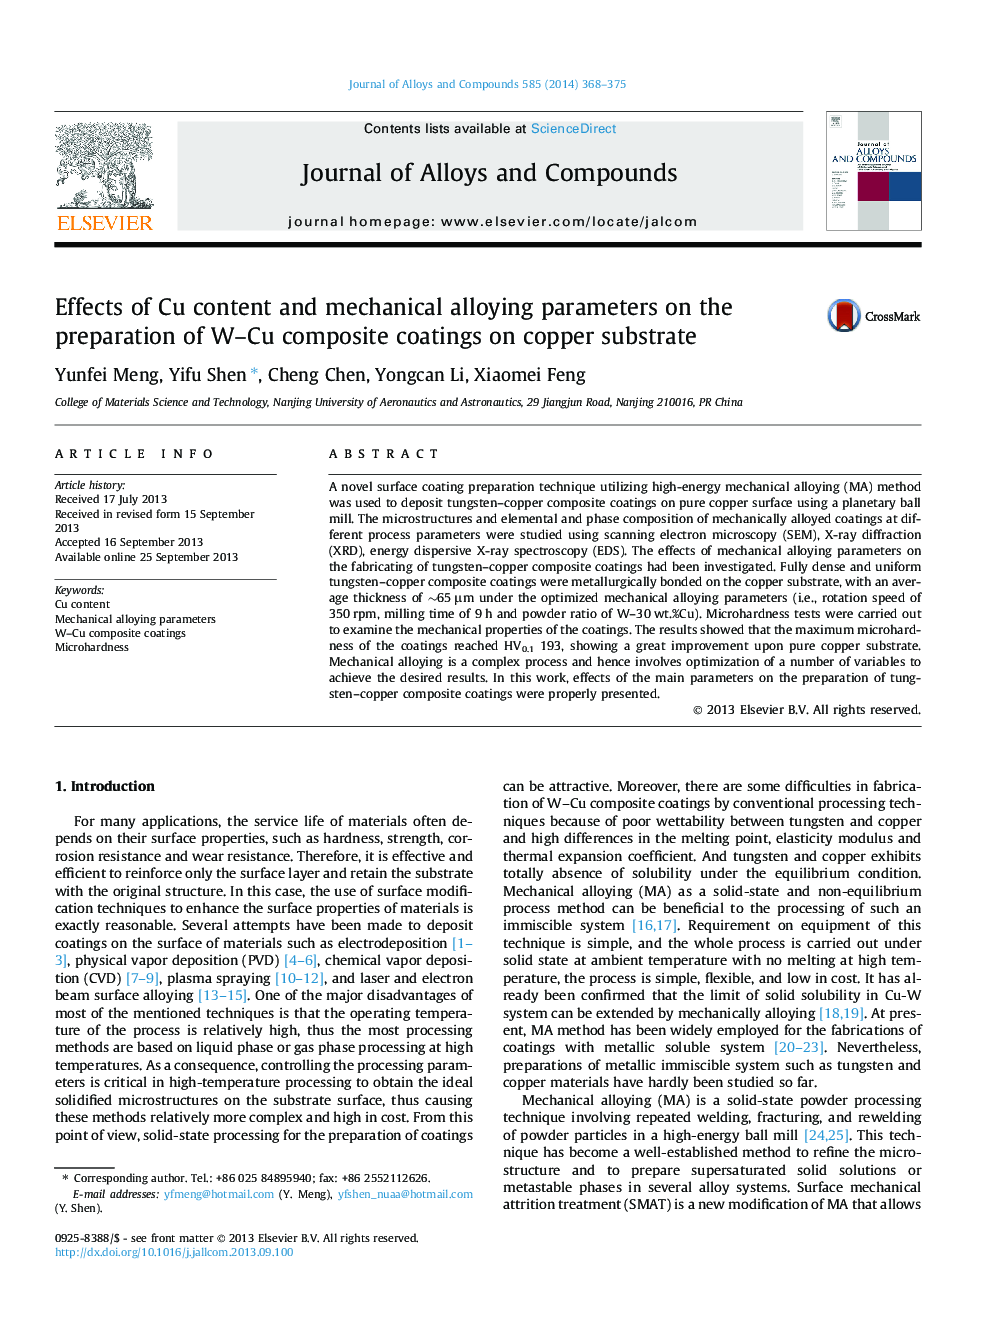 Effects of Cu content and mechanical alloying parameters on the preparation of W–Cu composite coatings on copper substrate